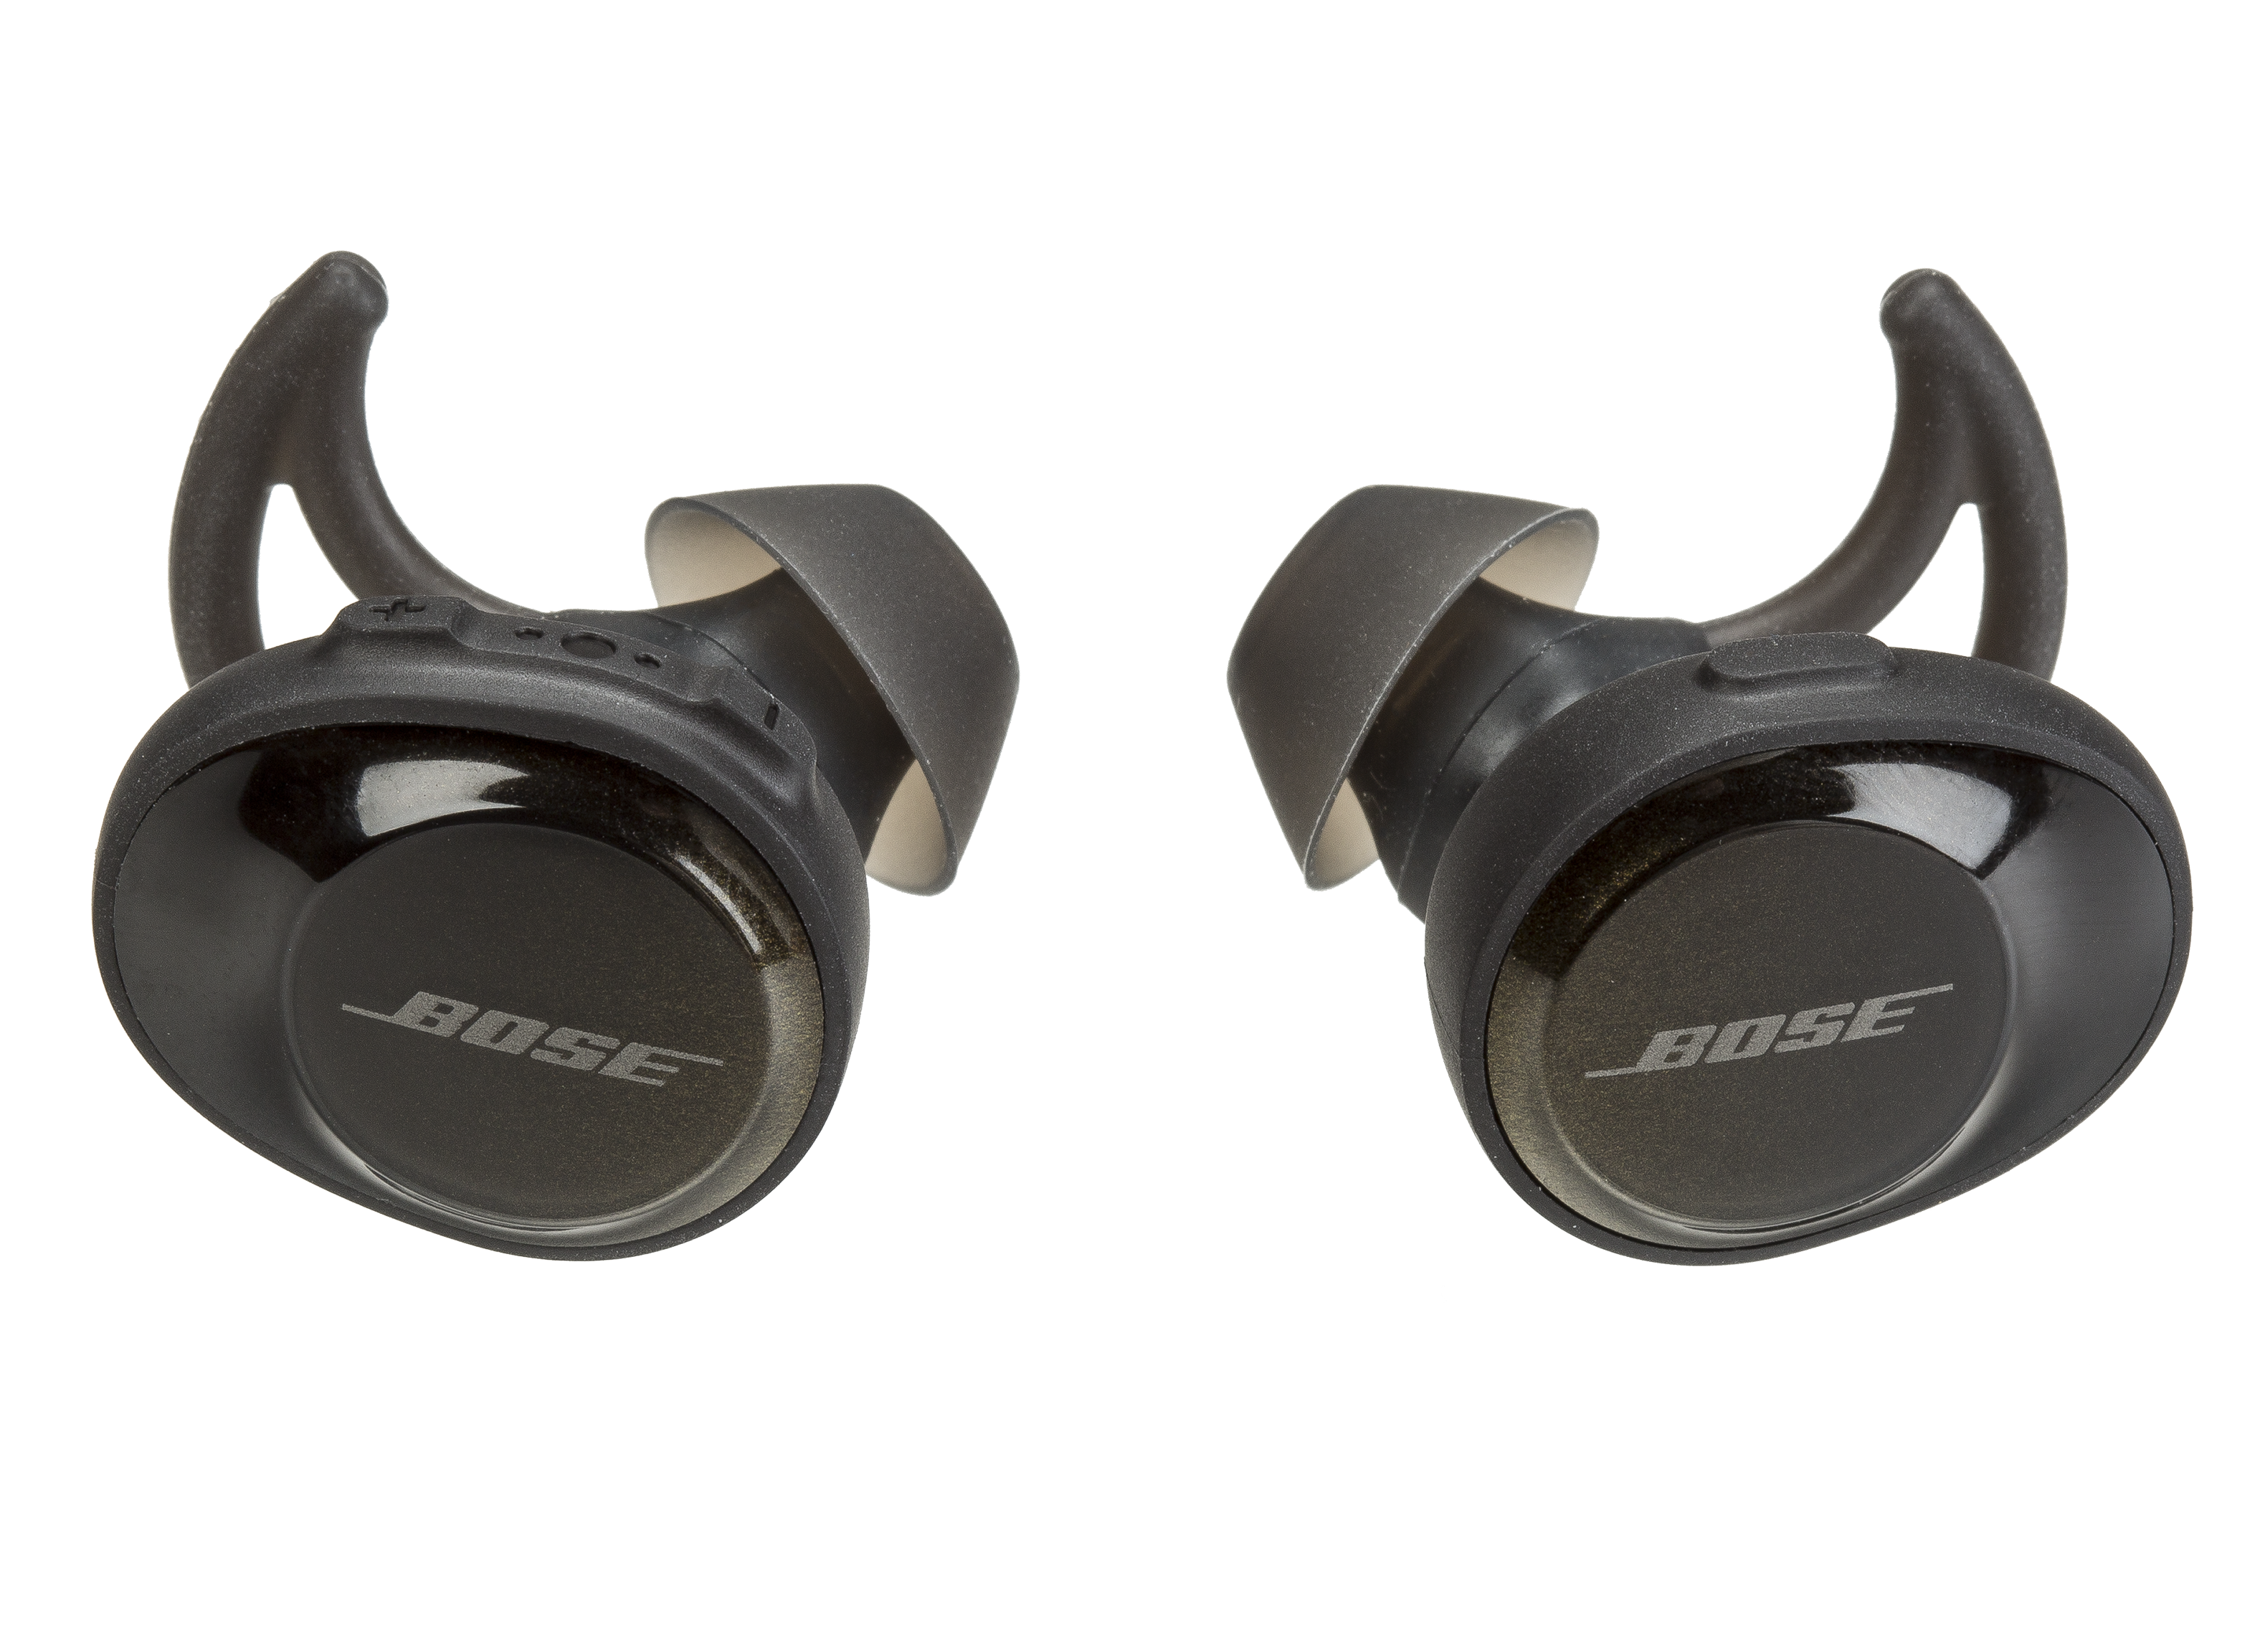 Bose SoundSport Free wireless headphones review: Worth the price tag